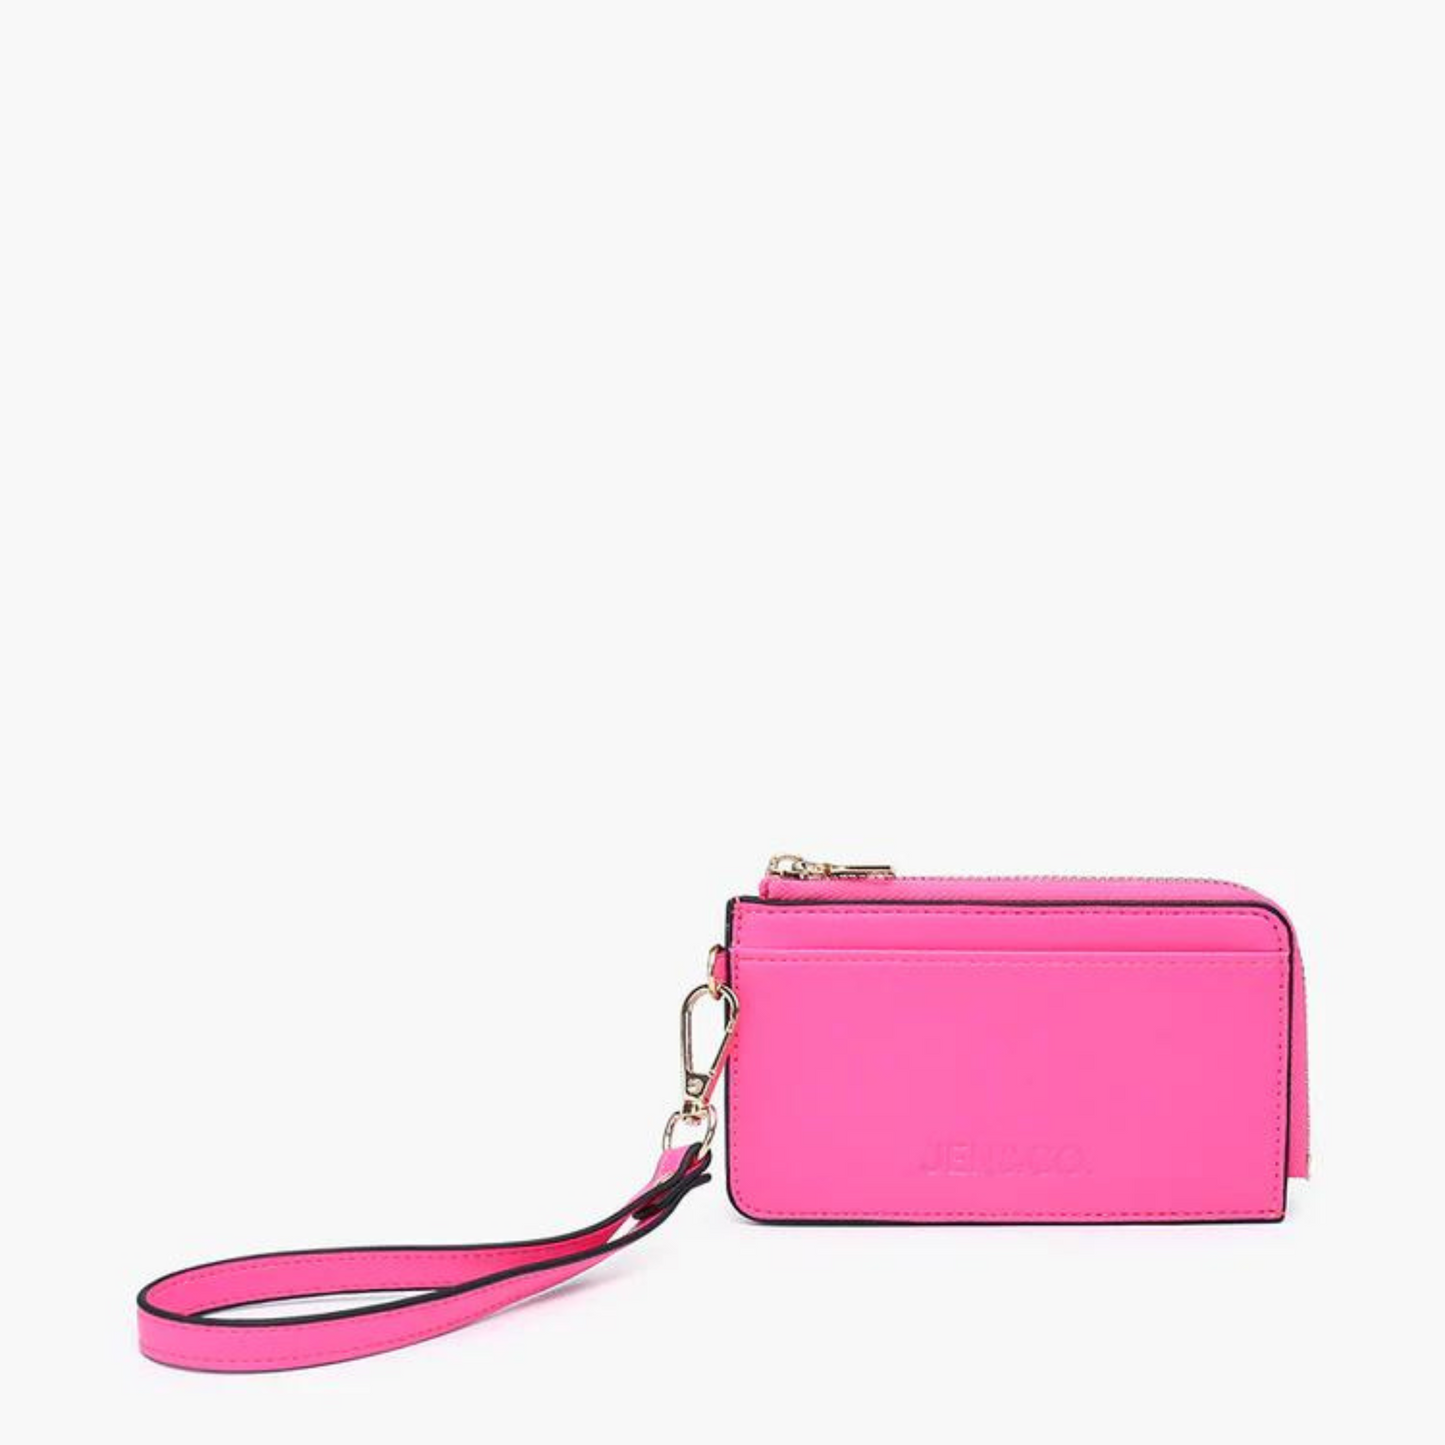 Annalise wallet in hot pink